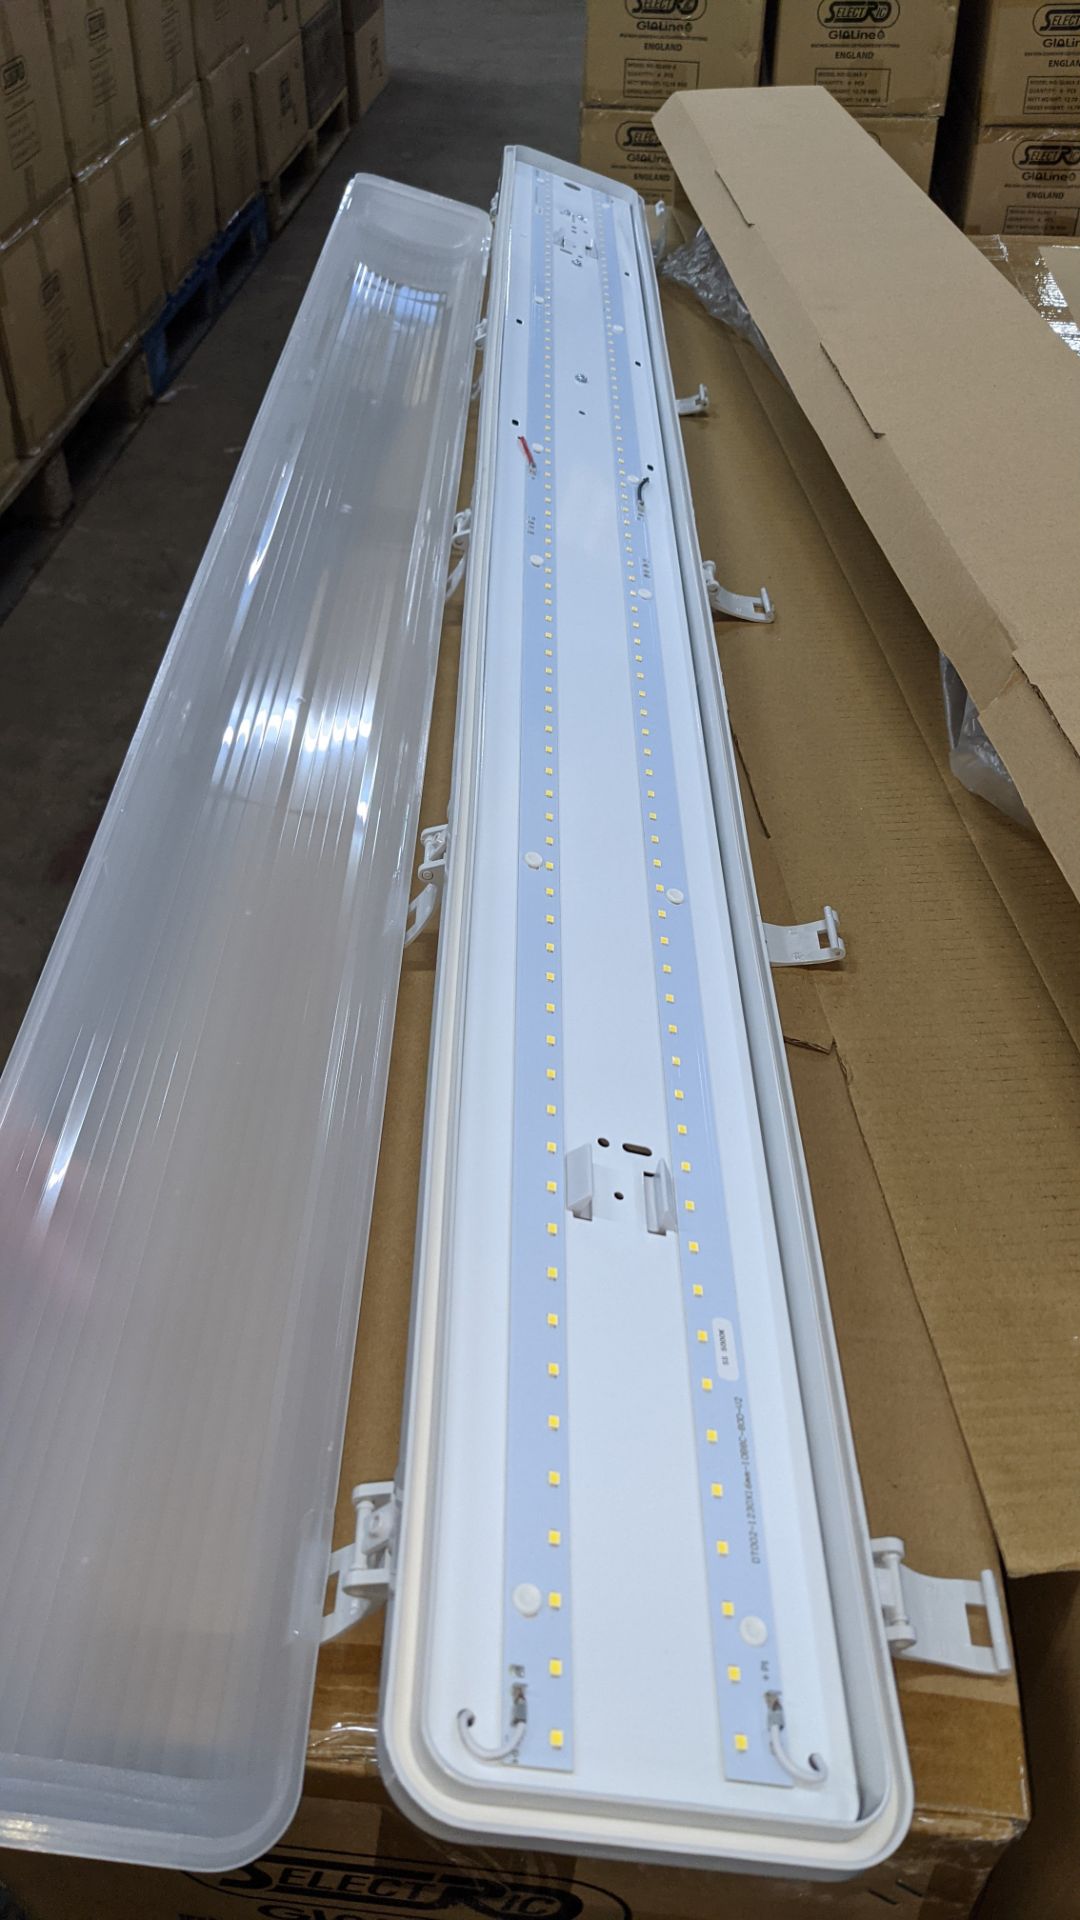 18 off IP65 non-corrosive LED fluorescent light fittings. Model GLO65-4, 4', twin LED 40W, polycarb - Image 6 of 6